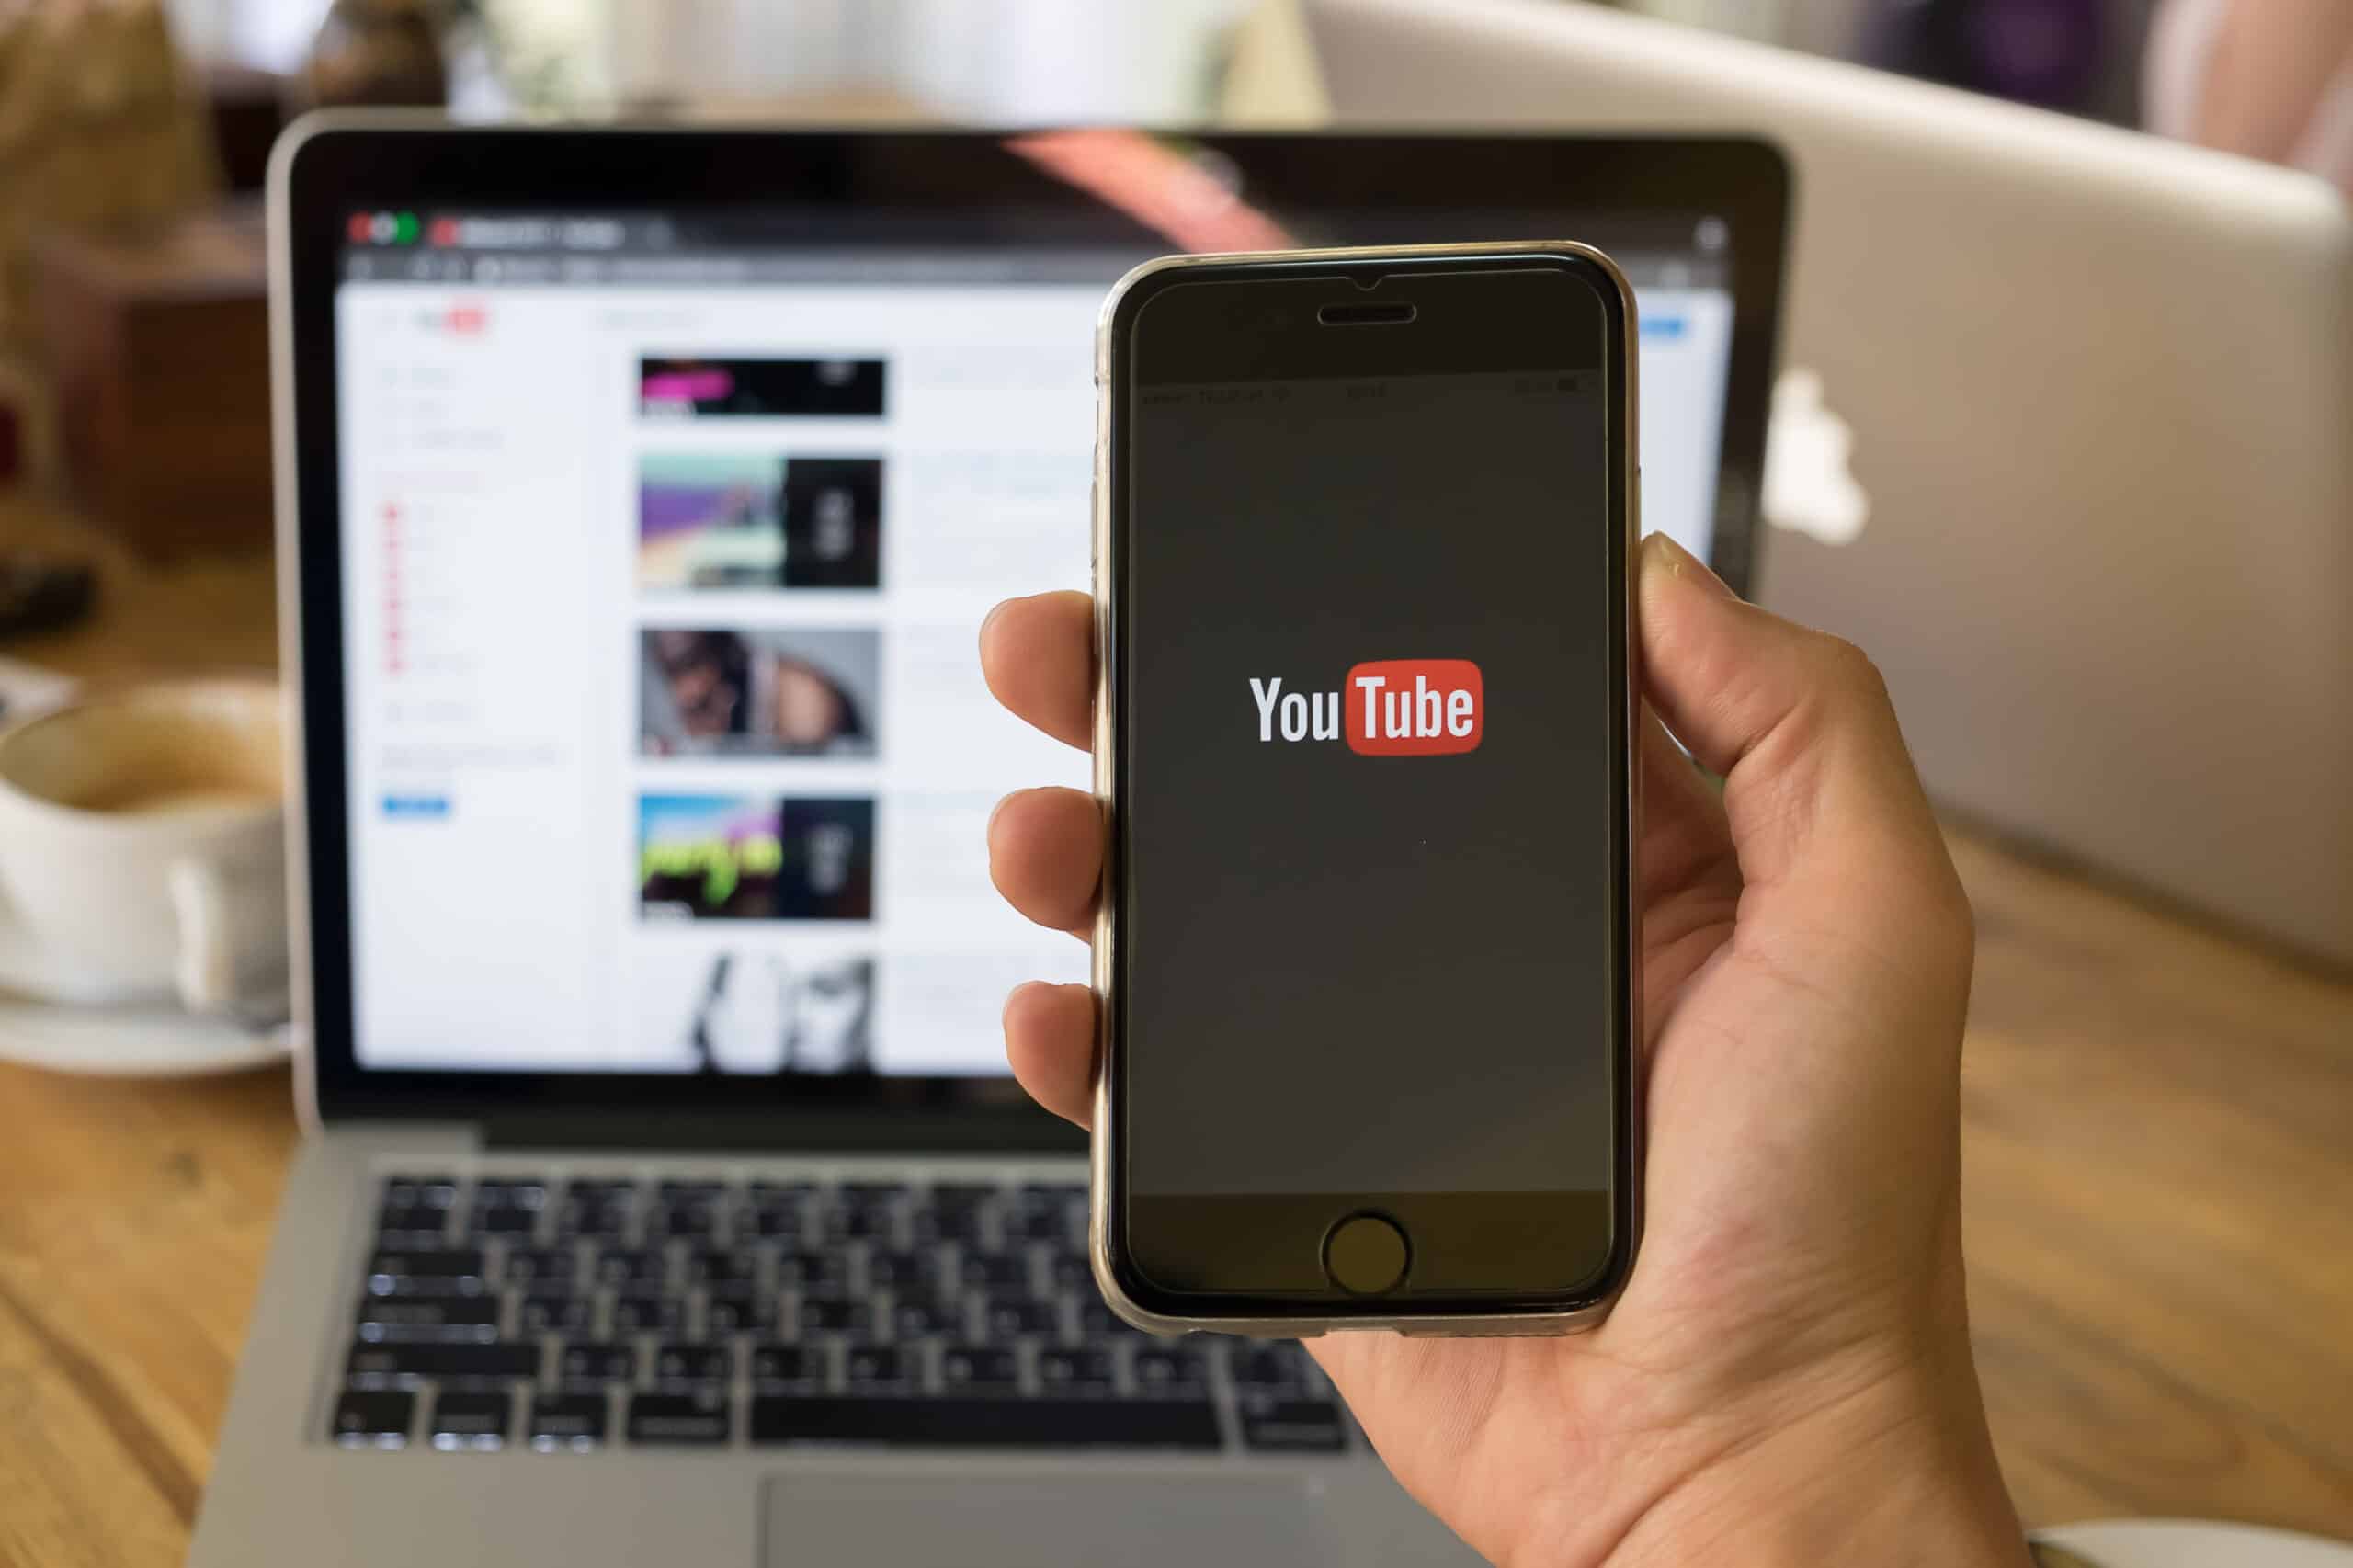 YouTube on smartphone and laptop